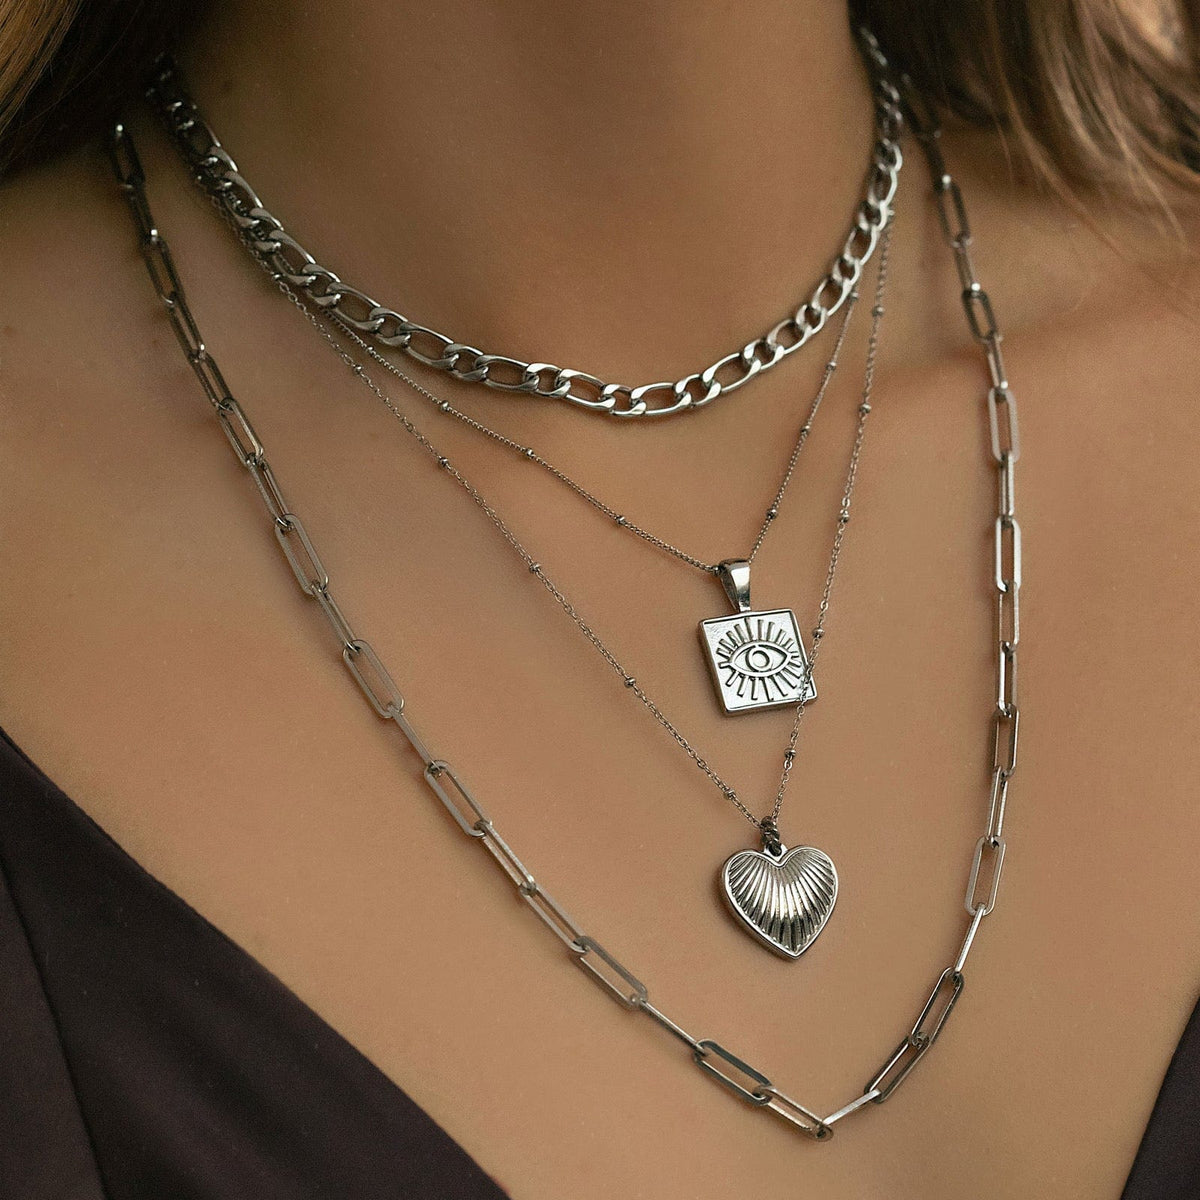 BohoMoon Stainless Steel Affluent Necklace